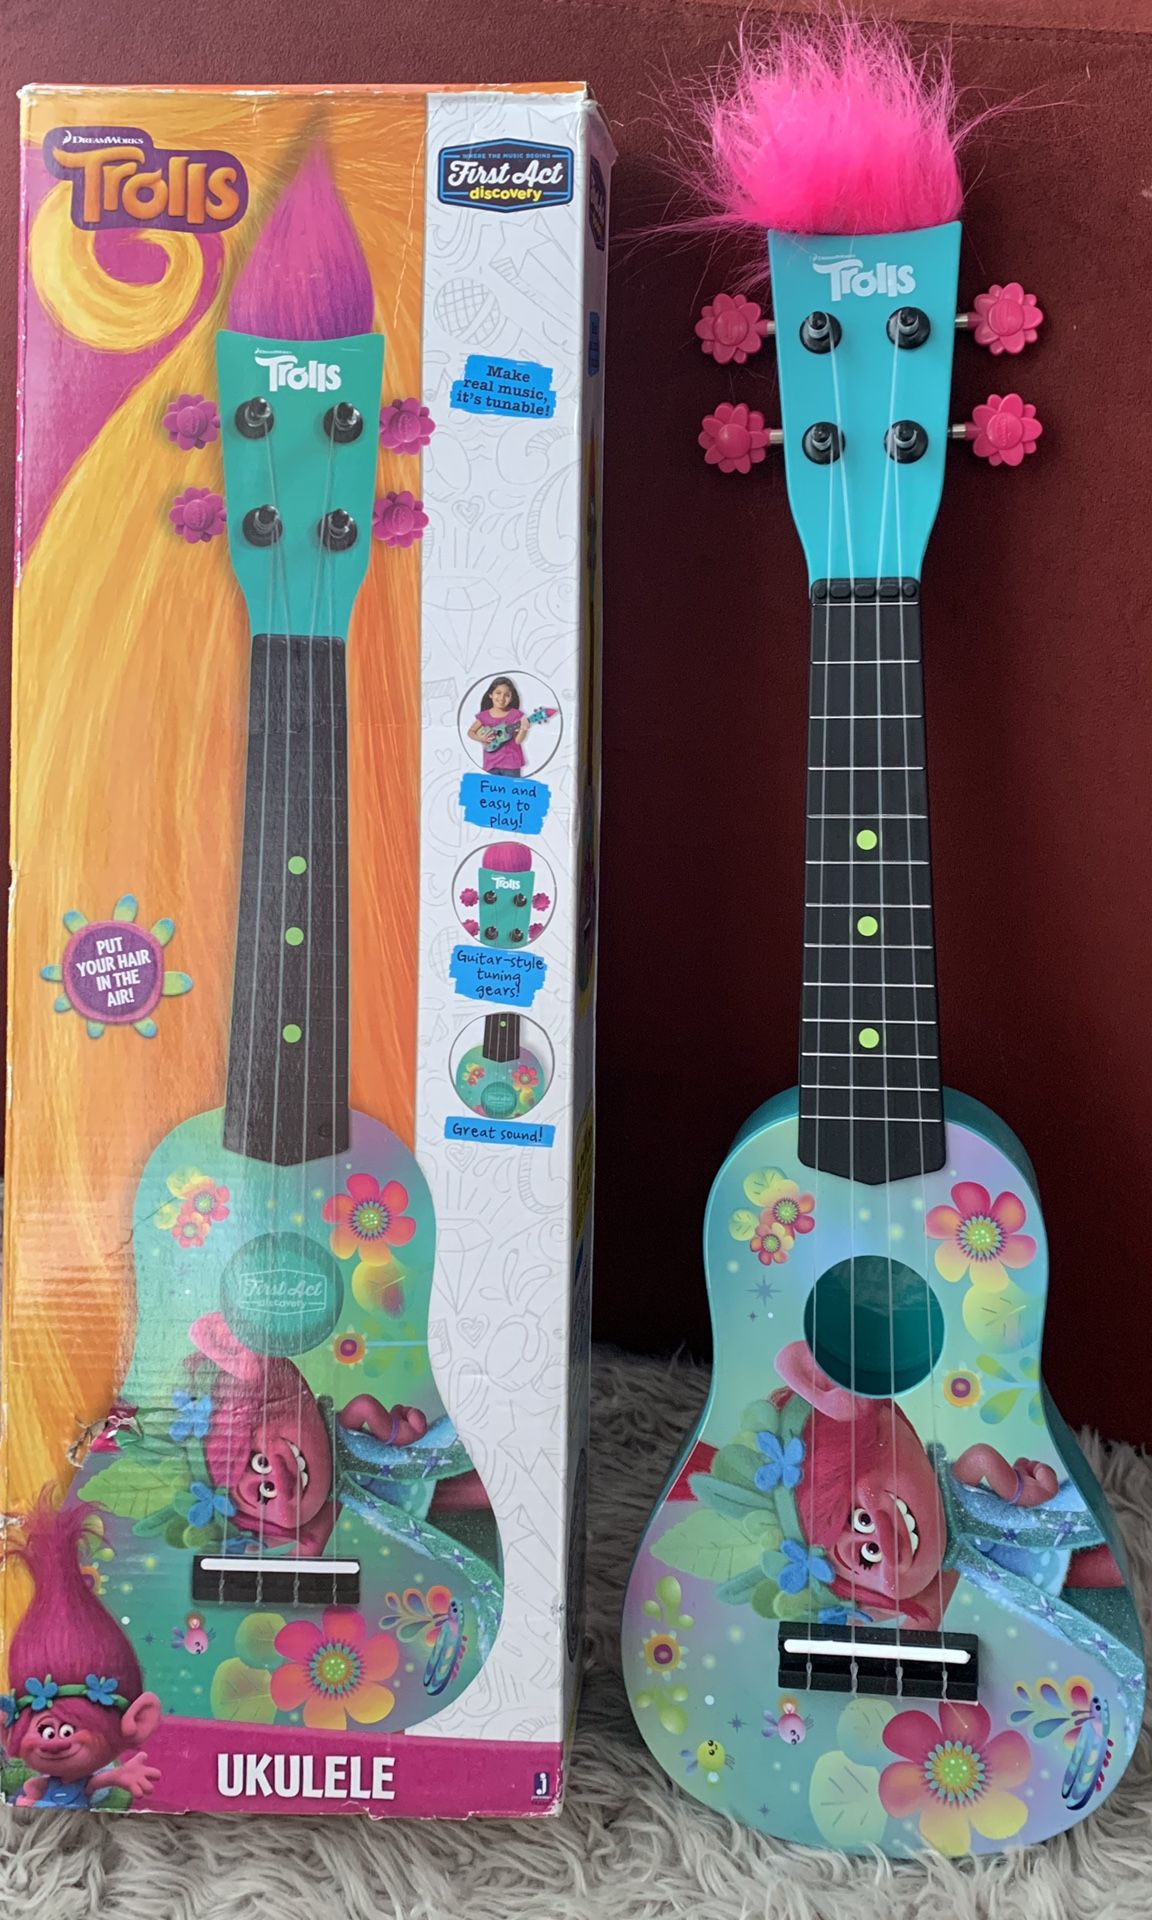 Trolls First Act Discovery 4 String Ukulele